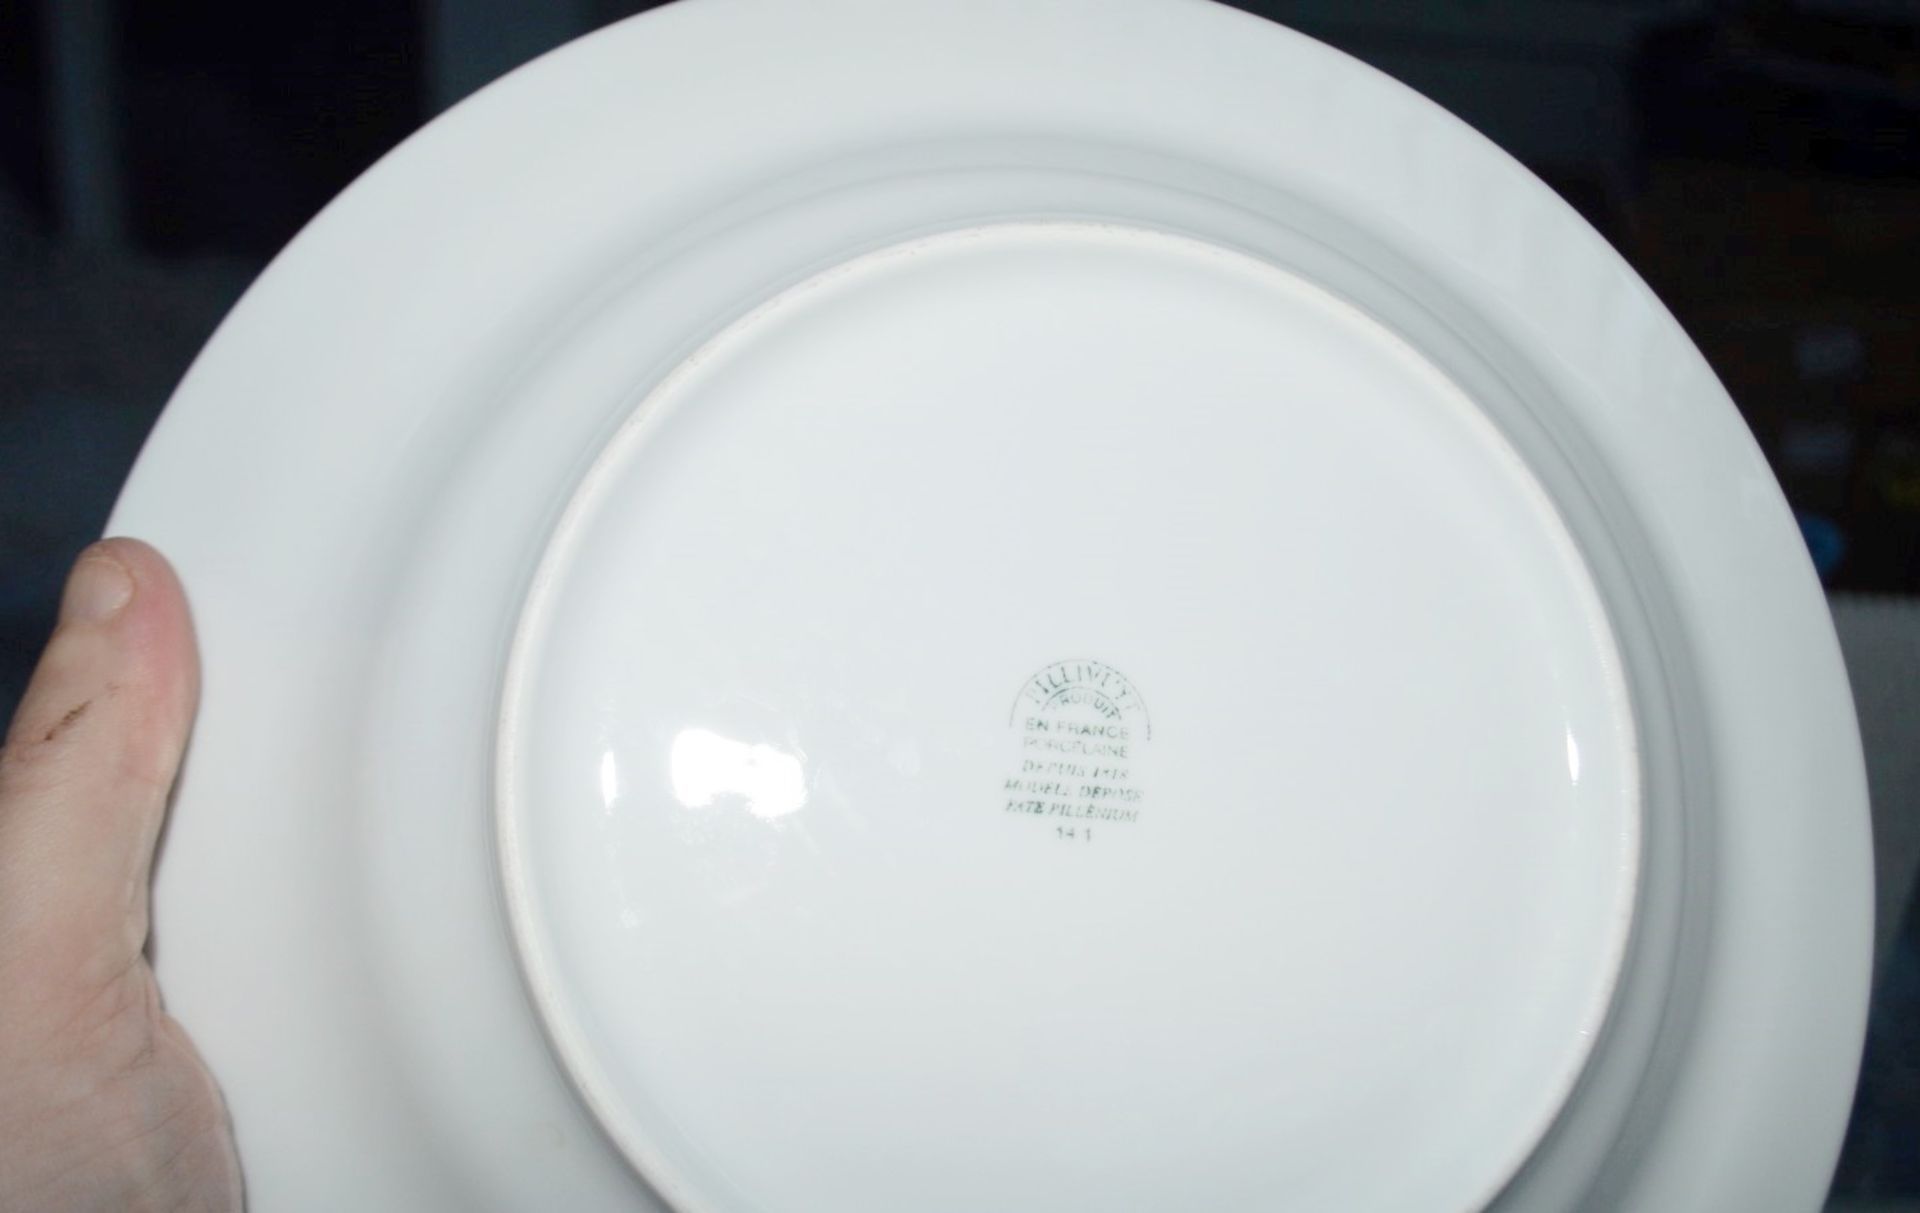 12 x PILLIVUYT Porcelain Pasta / Soup Plates In White Featuring 'Famous Branding' In Gold - Image 2 of 5